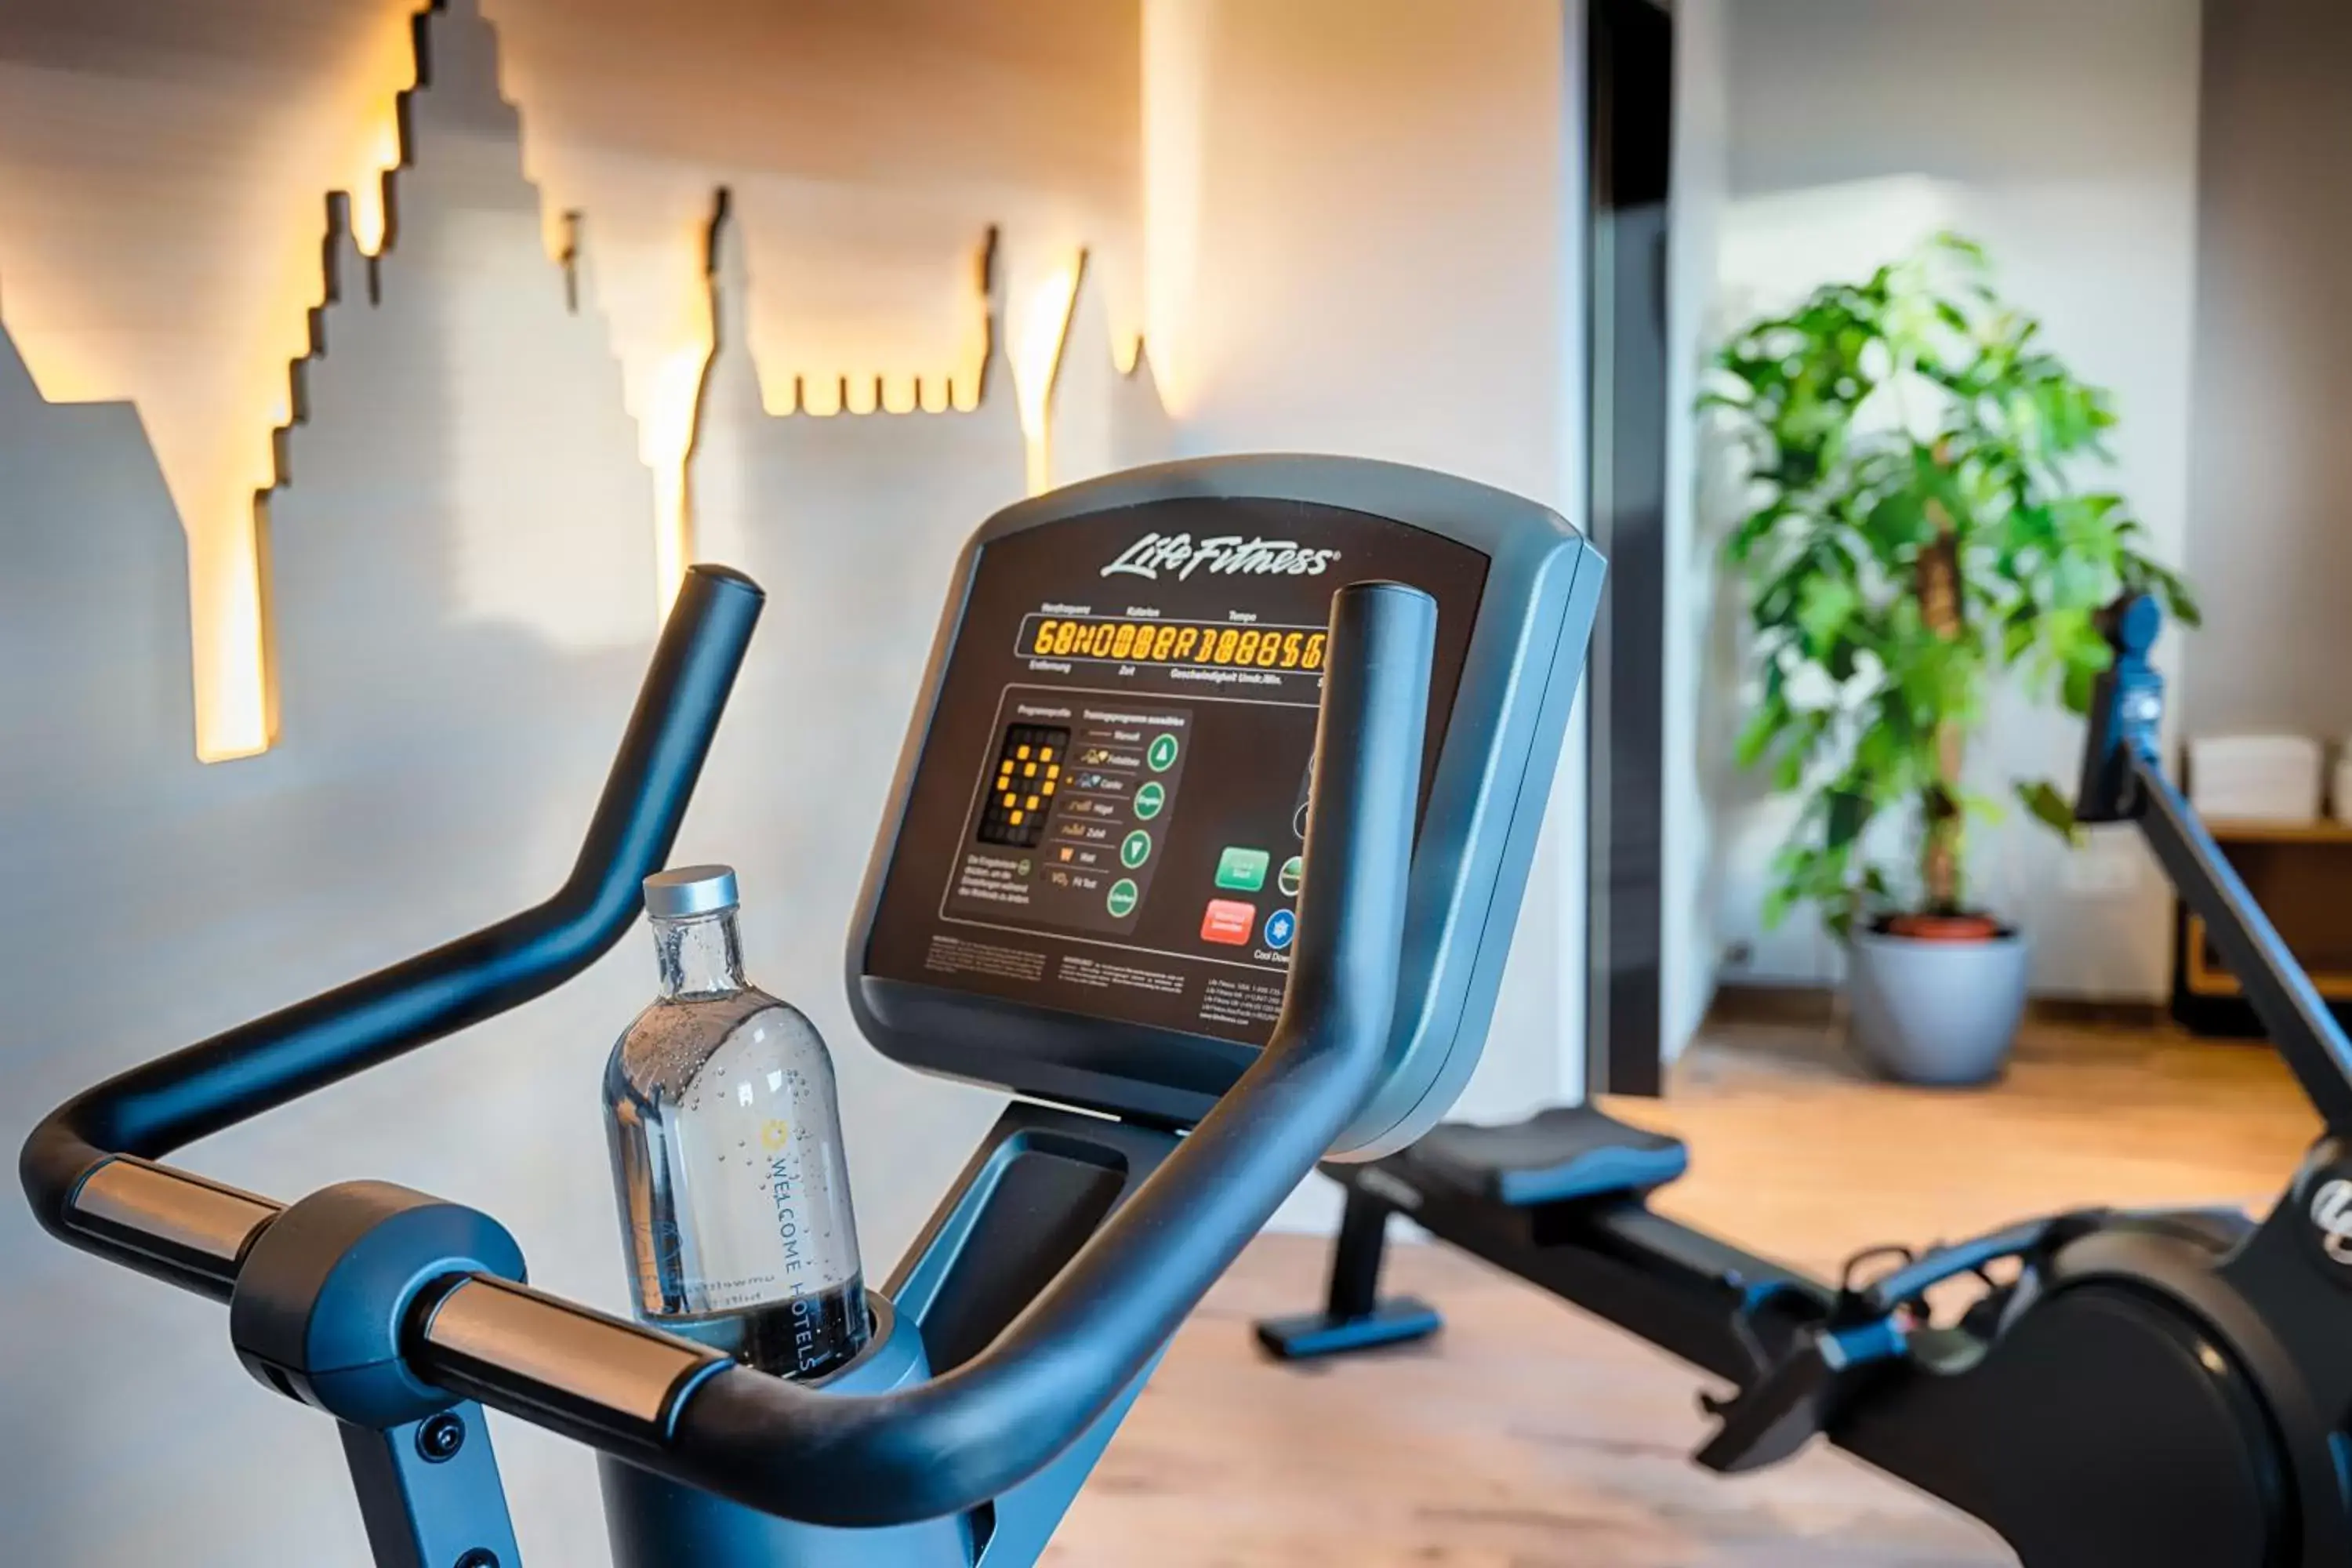 Fitness centre/facilities, Fitness Center/Facilities in Welcome Hotel Paderborn